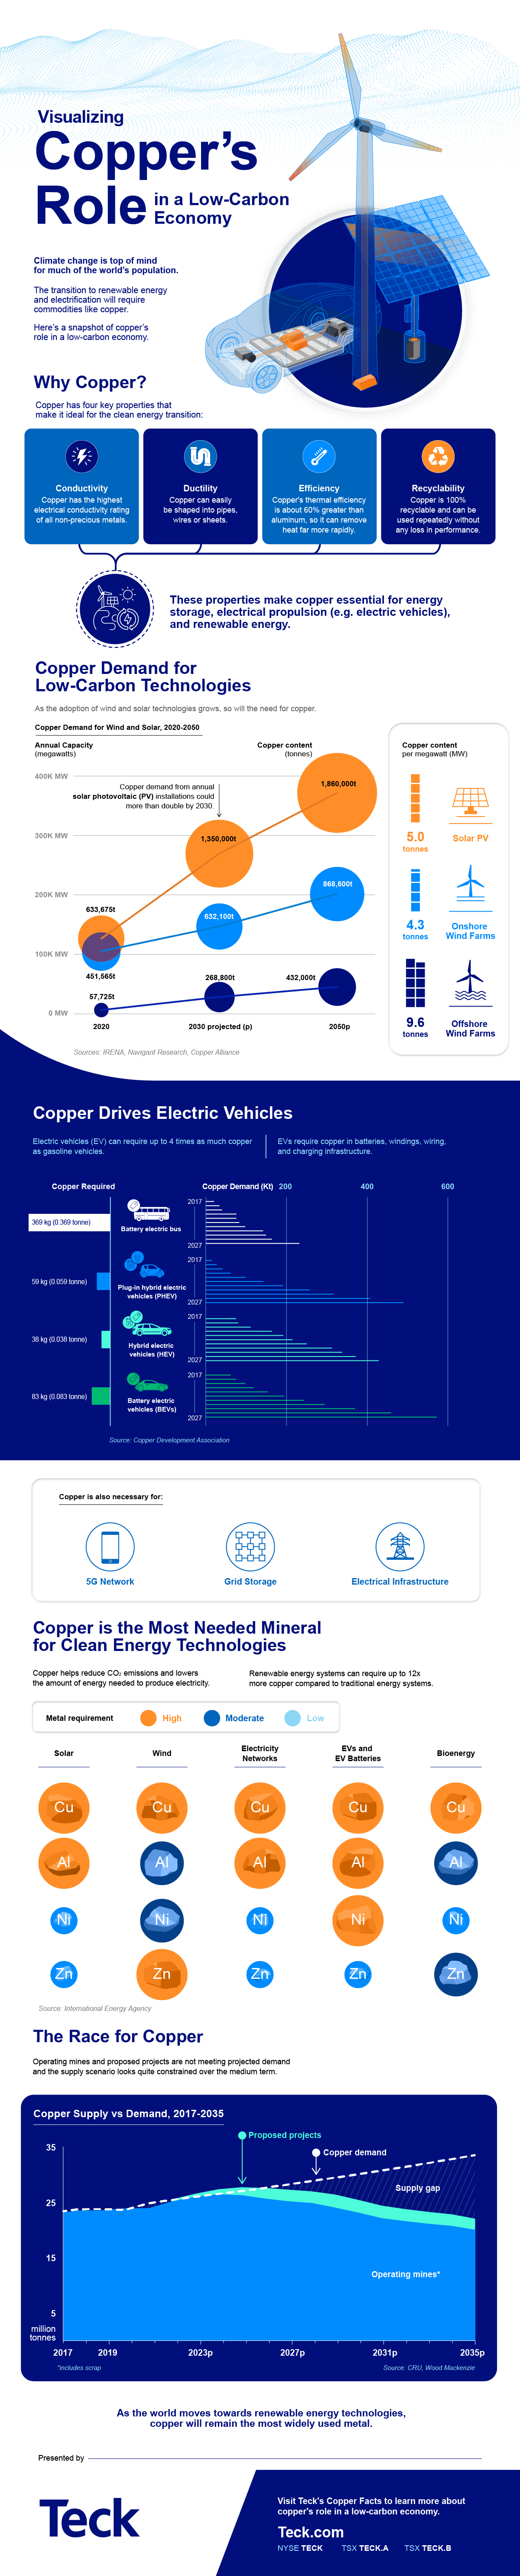 https://www.visualcapitalist.com/wp-content/uploads/2021/10/Teck-Resources-Visualizing-Coppers-Role-in-a-Low-Carbon-Economy_Oct-04-2021.jpg